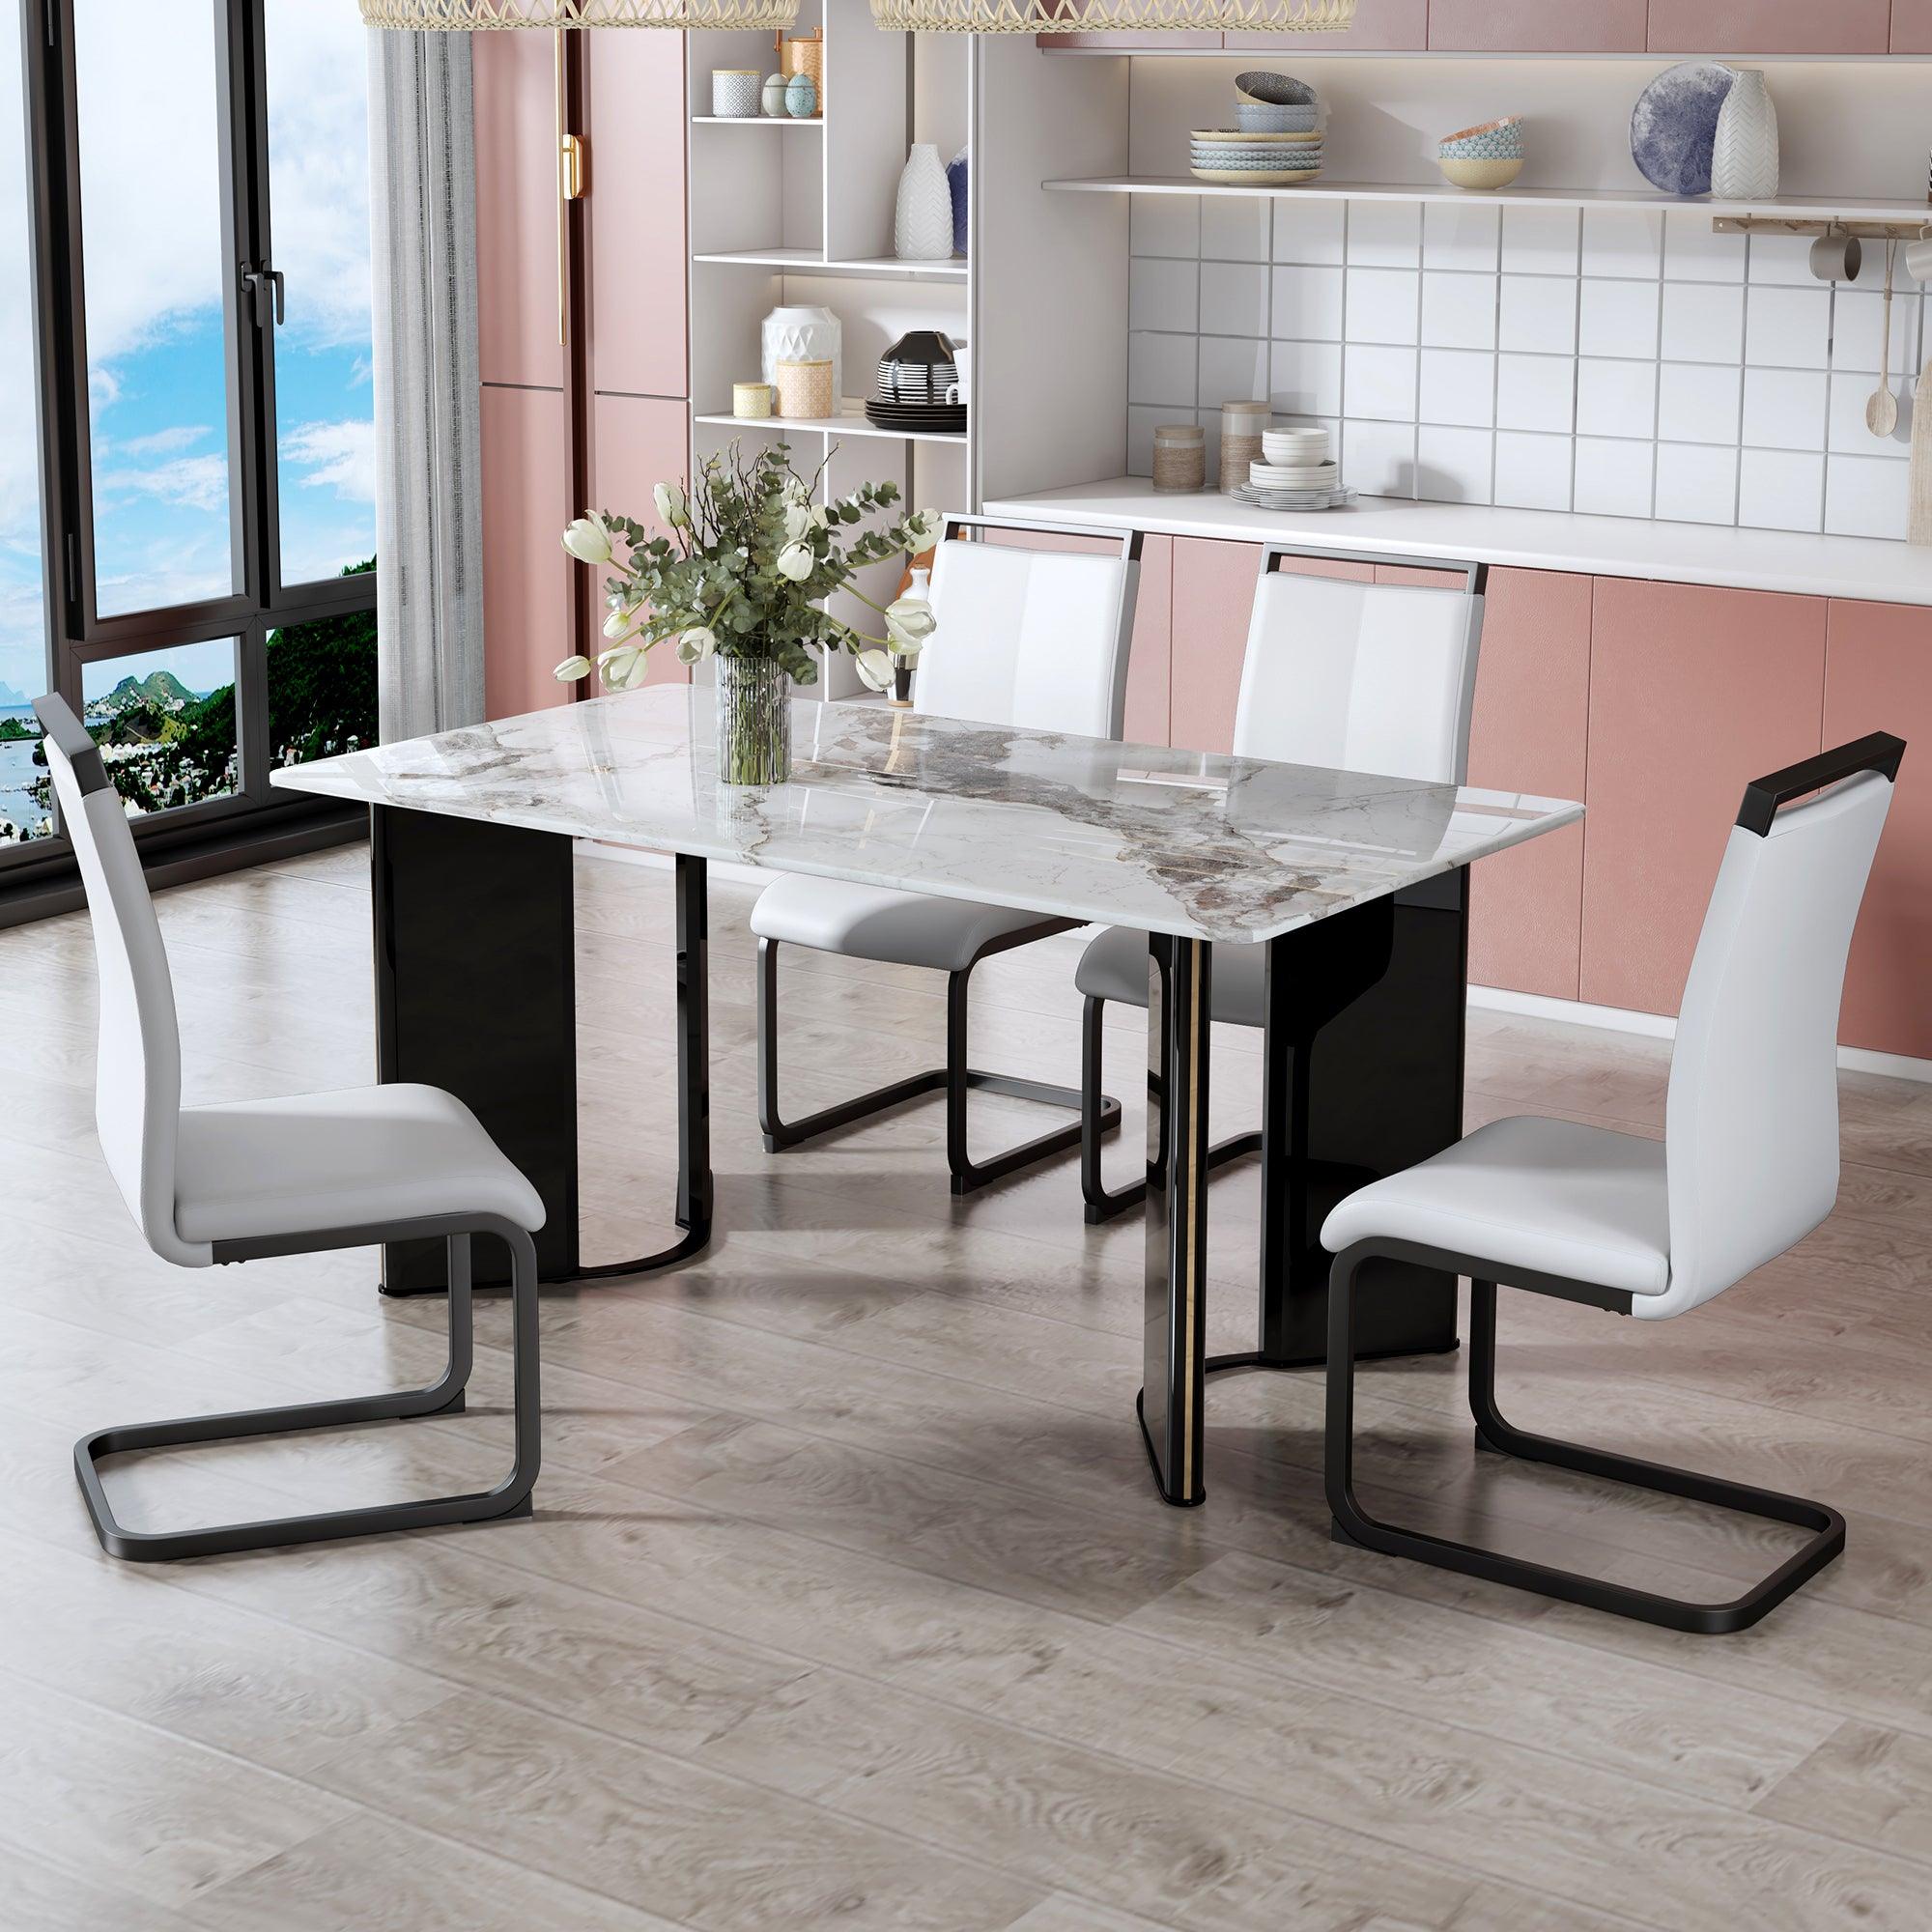 🆓🚛 Table & Chair Set, White Imitation Marble Desktop With Mdf Legs & Gold Metal Decorative Strips, 4 Dining Chairs With White Backrest & Black Metal Legs